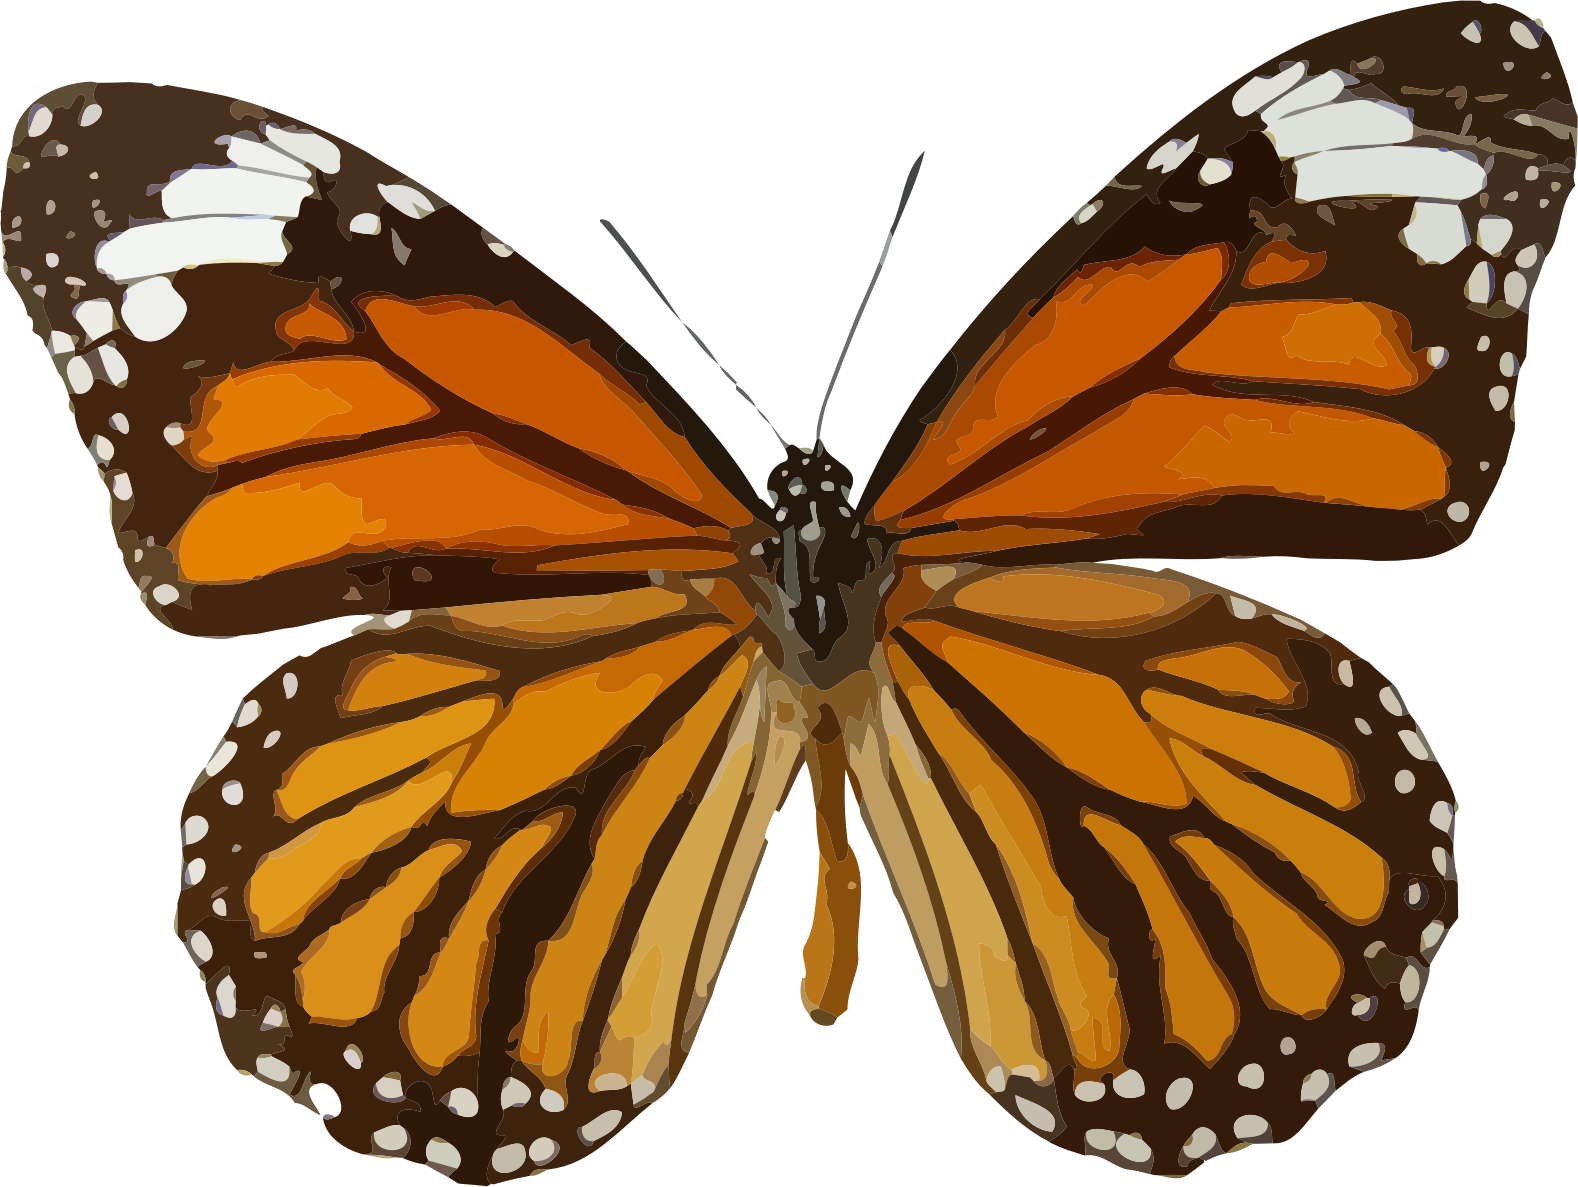 Big Image - Brown And Orange Butterfly (1578x1187)